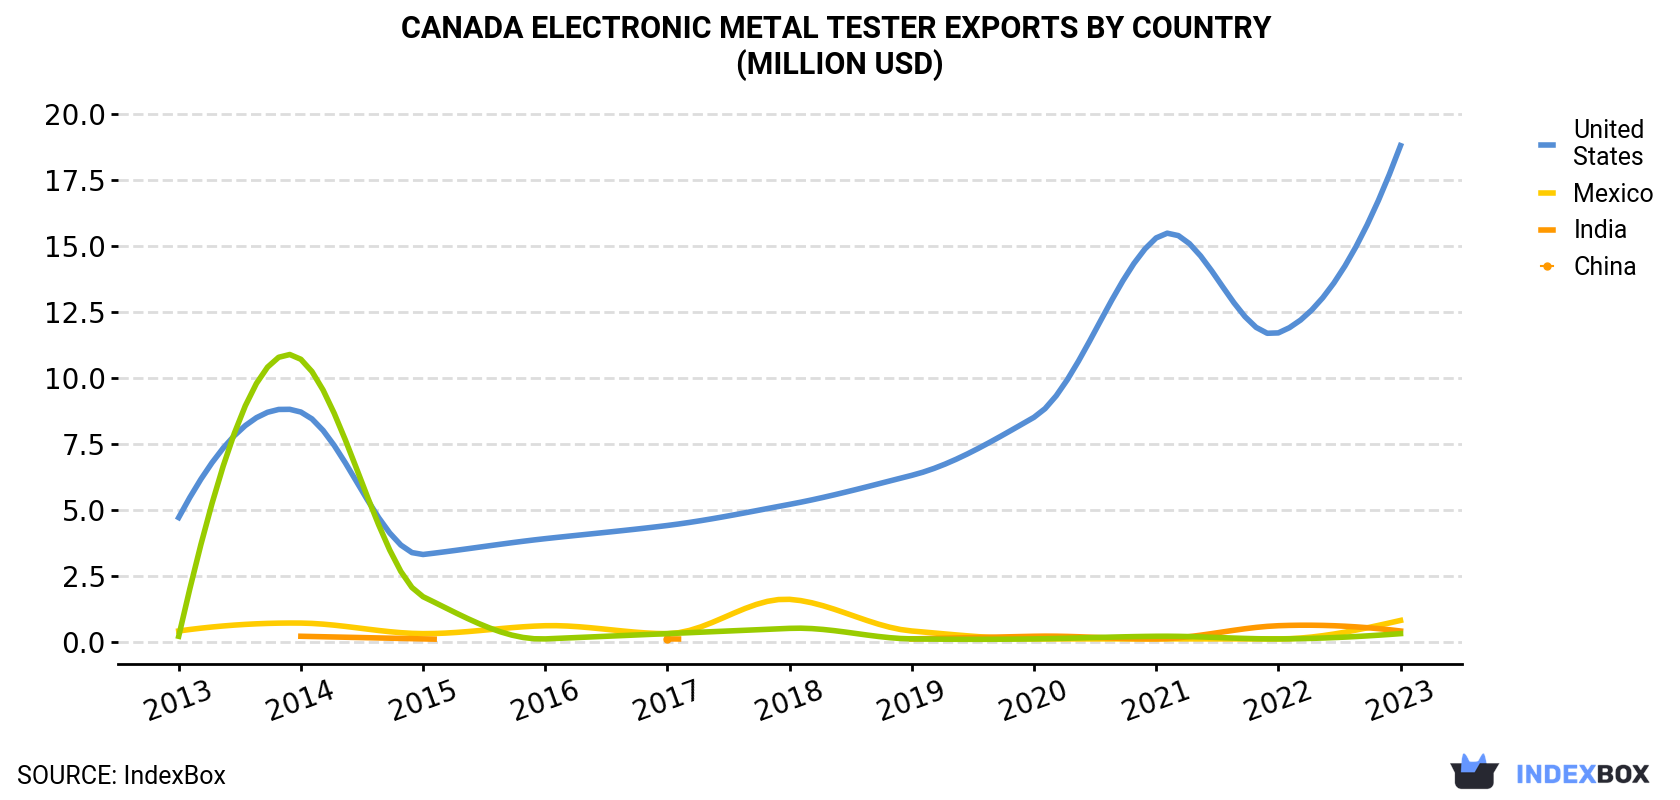 Canada Electronic Metal Tester Exports By Country (Million USD)